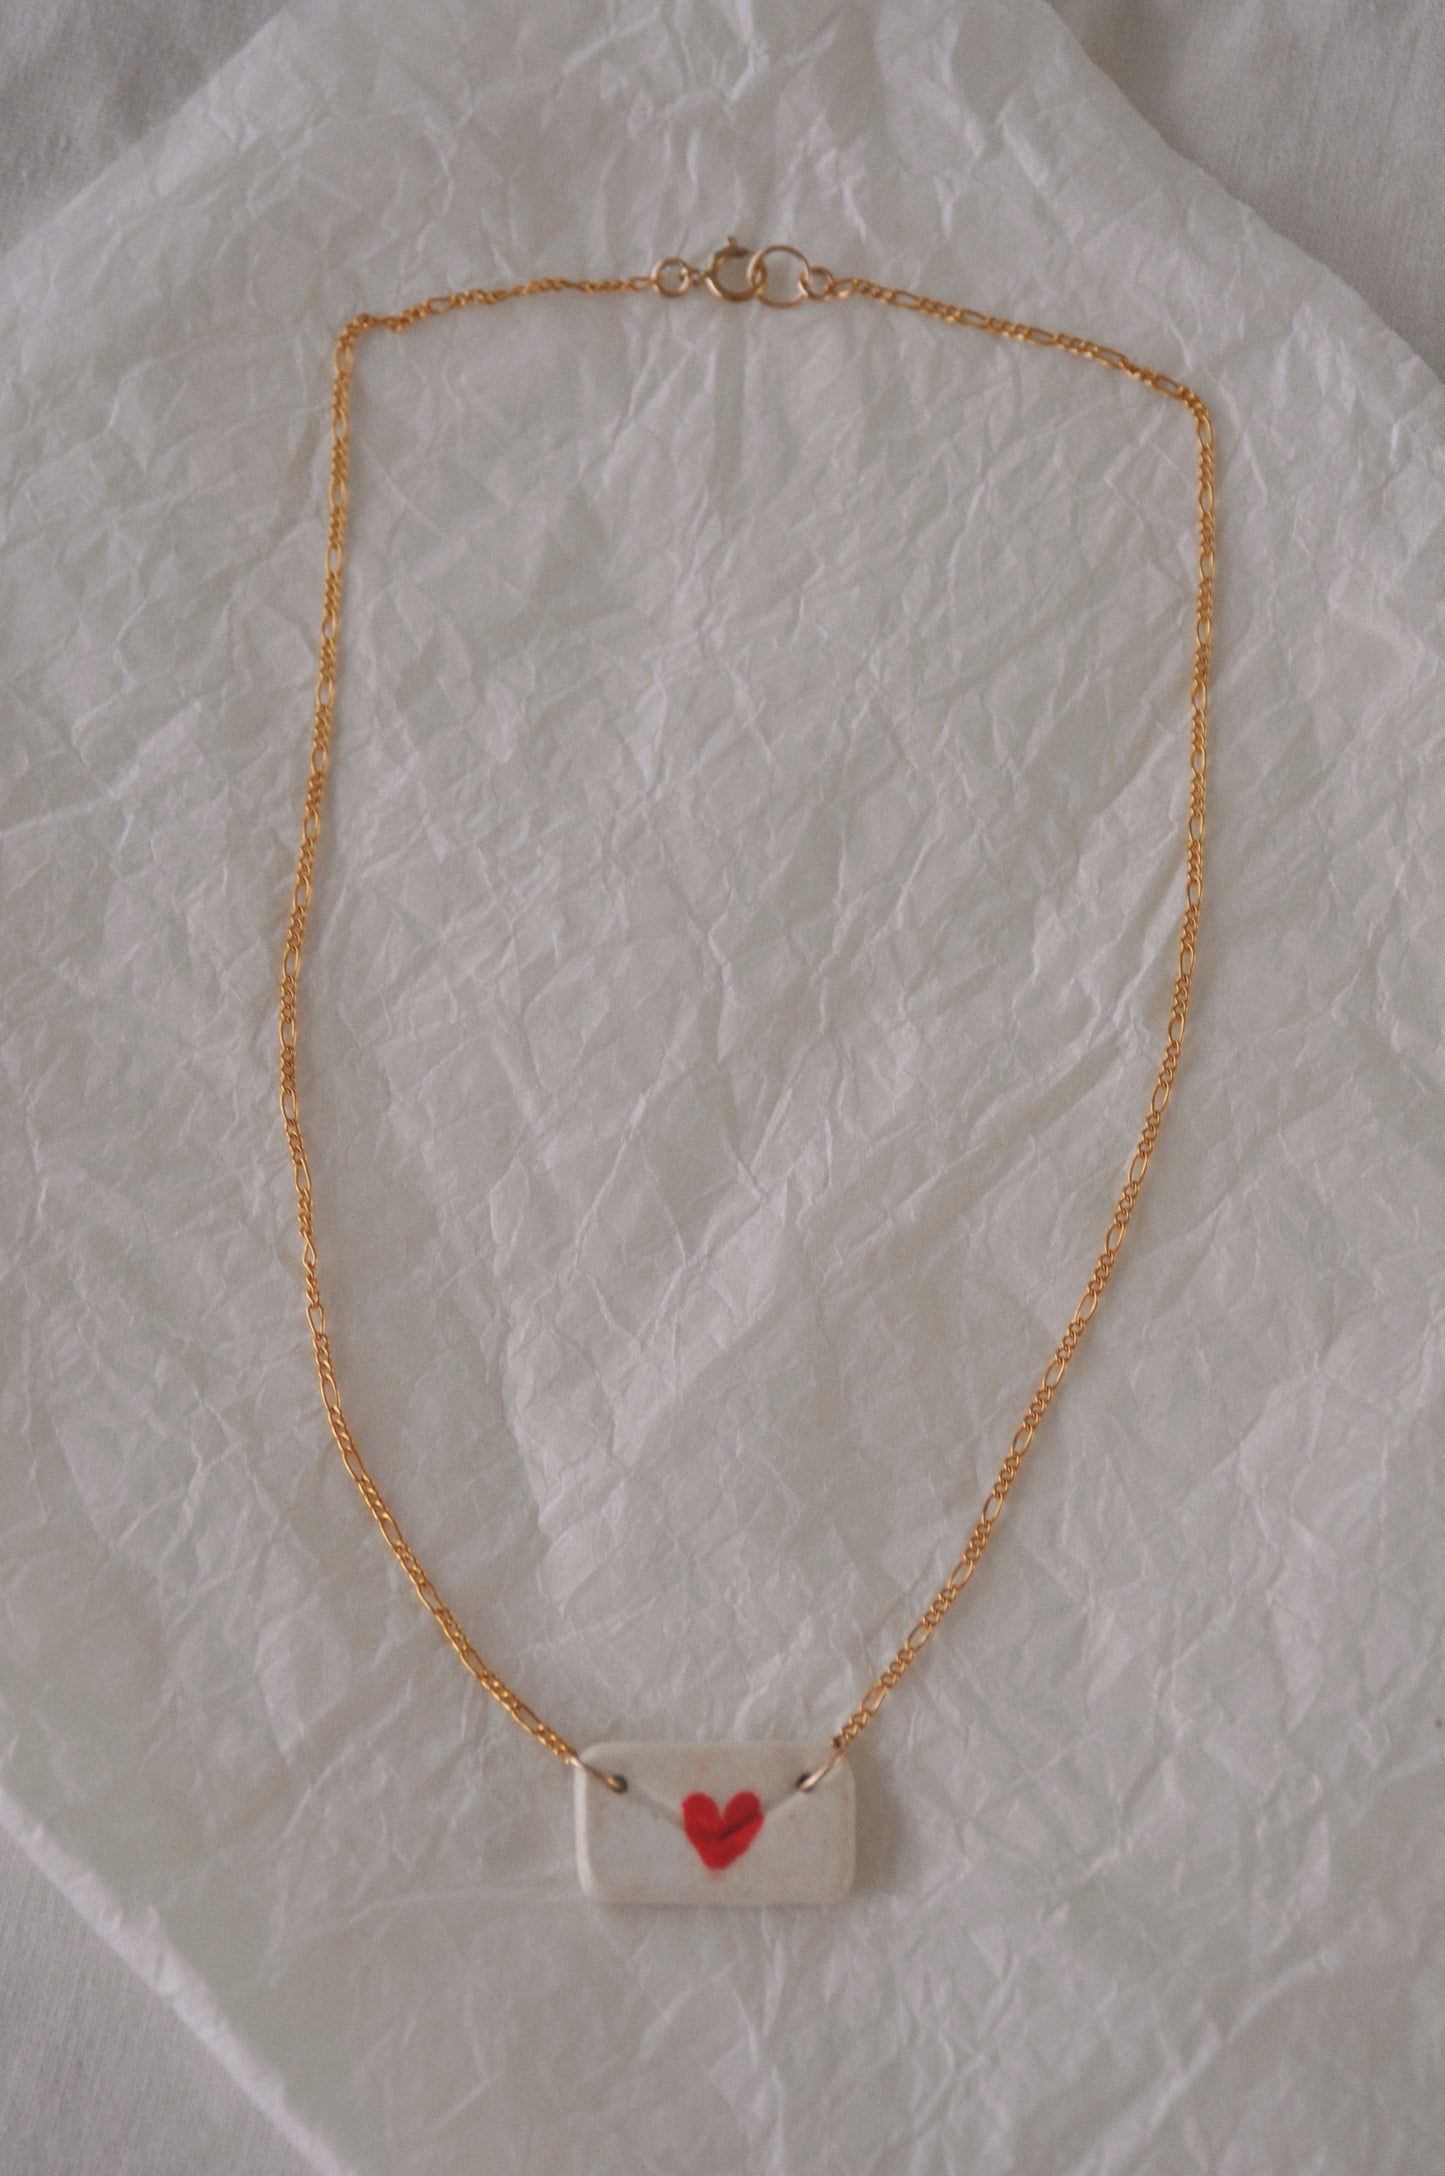 Solo amor - Collier